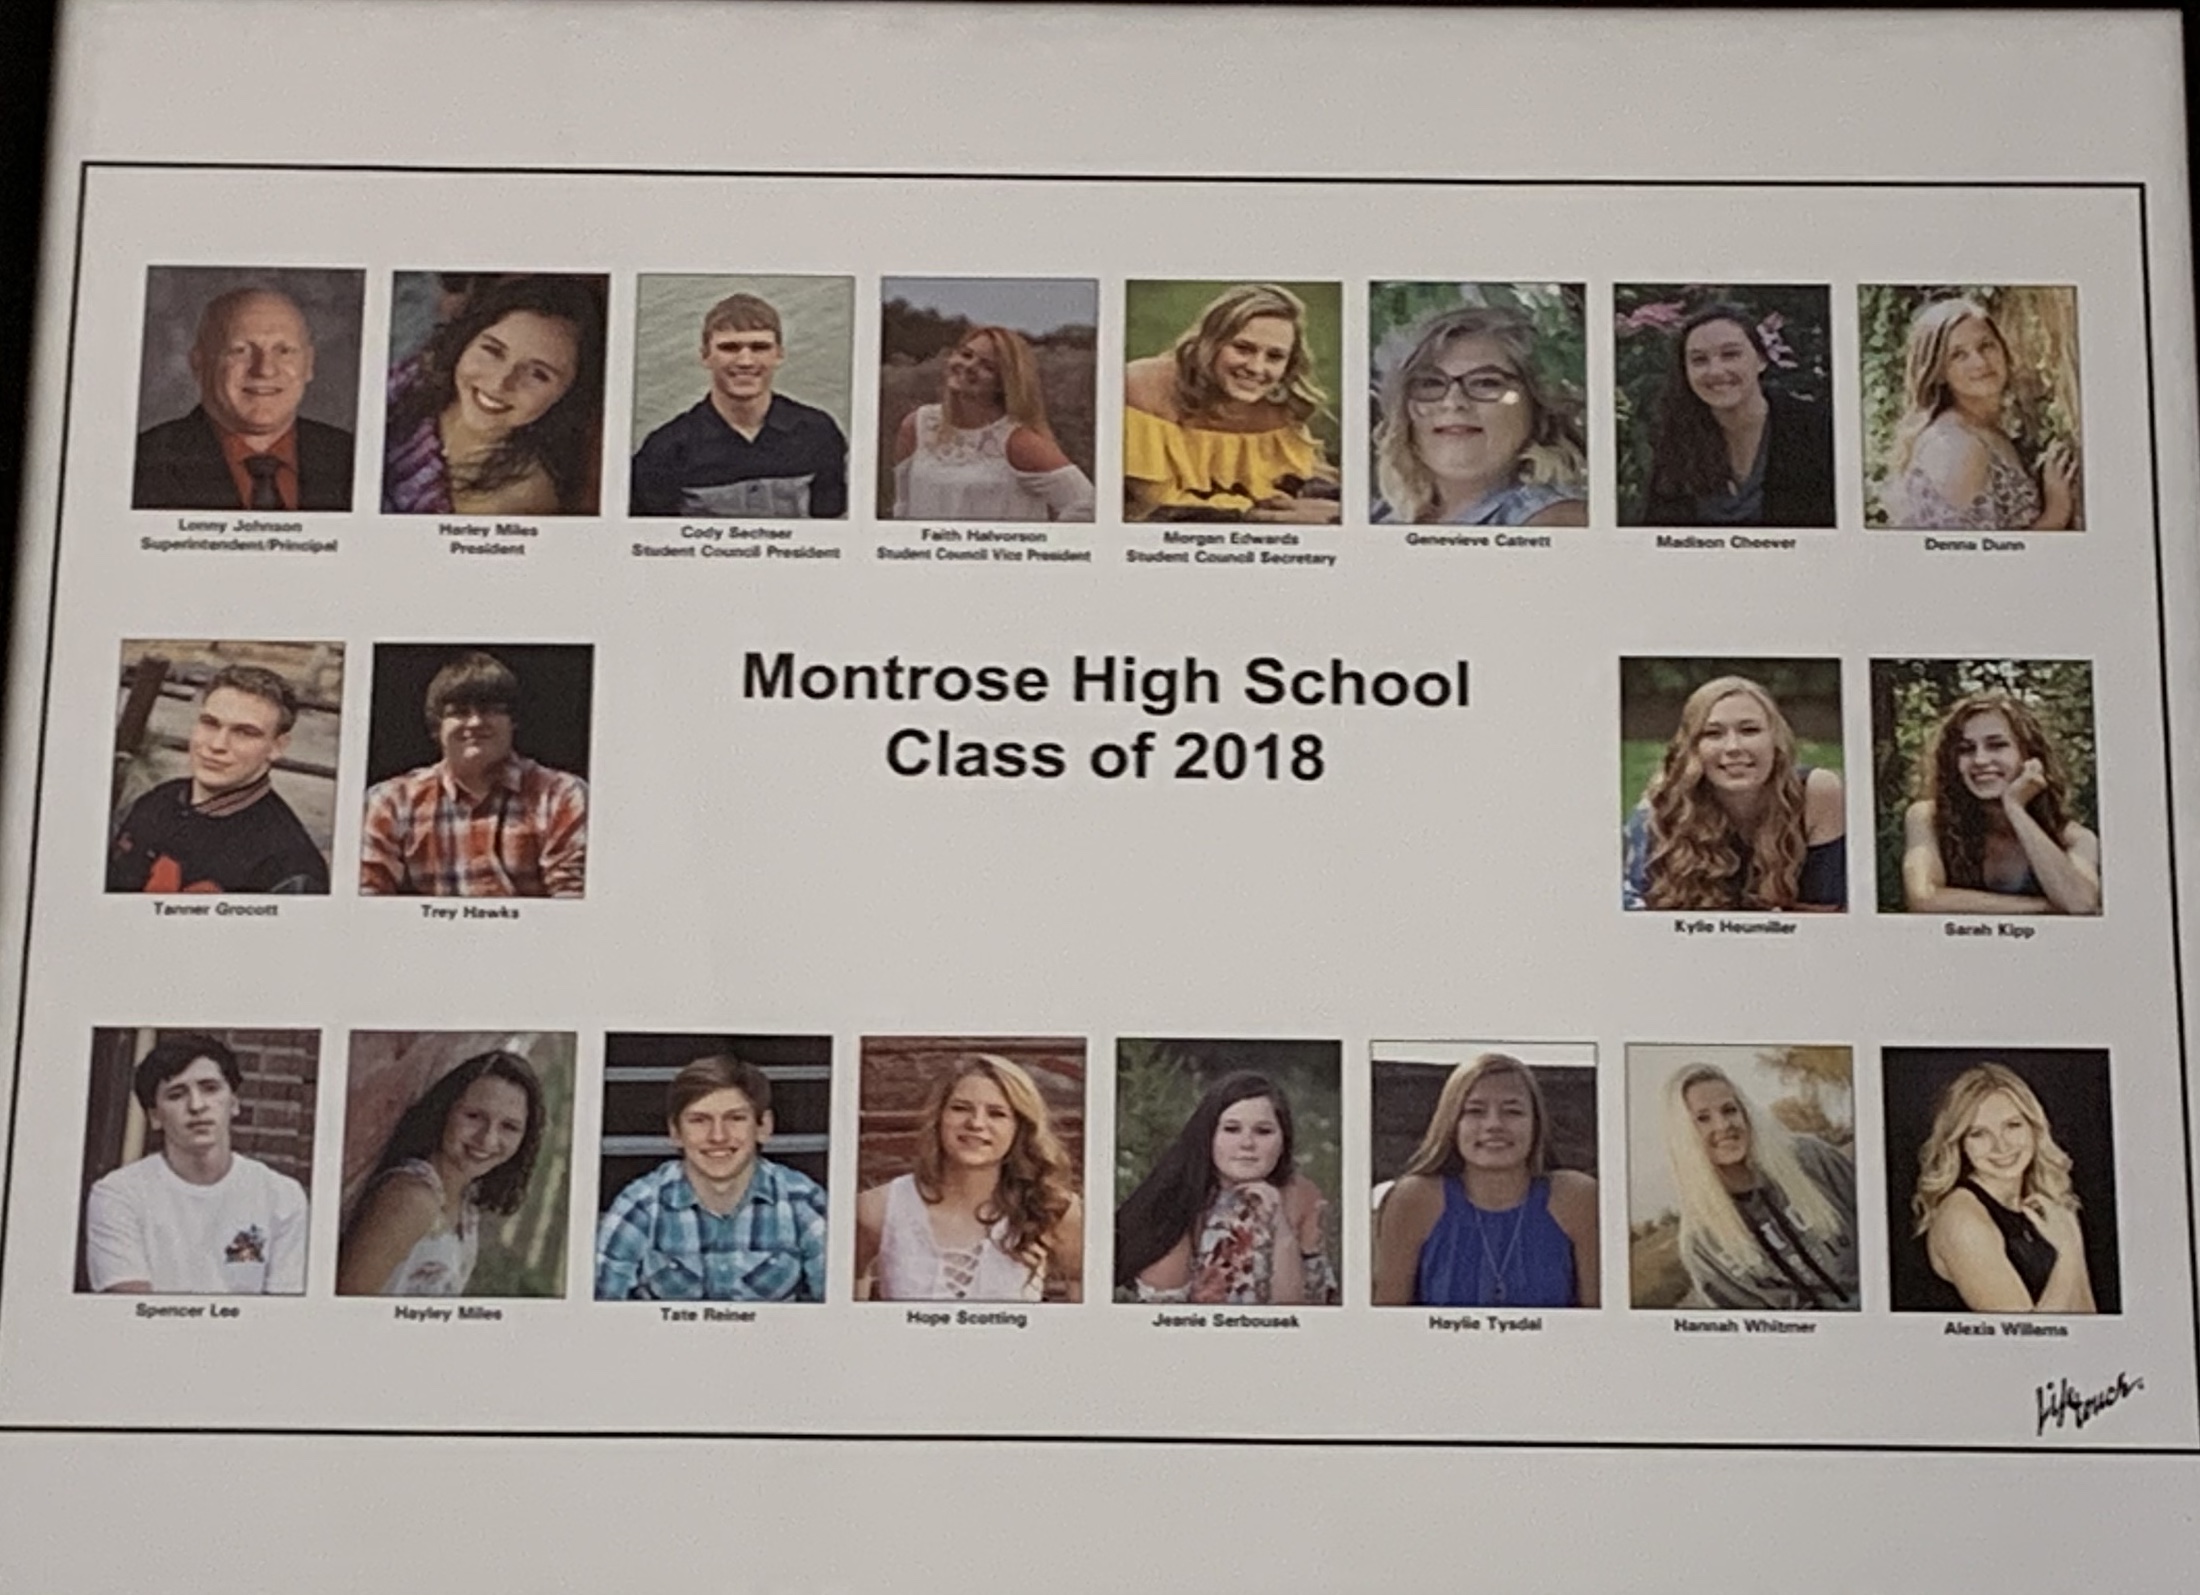 PHOTOS OF THE CLASS OF 2018.